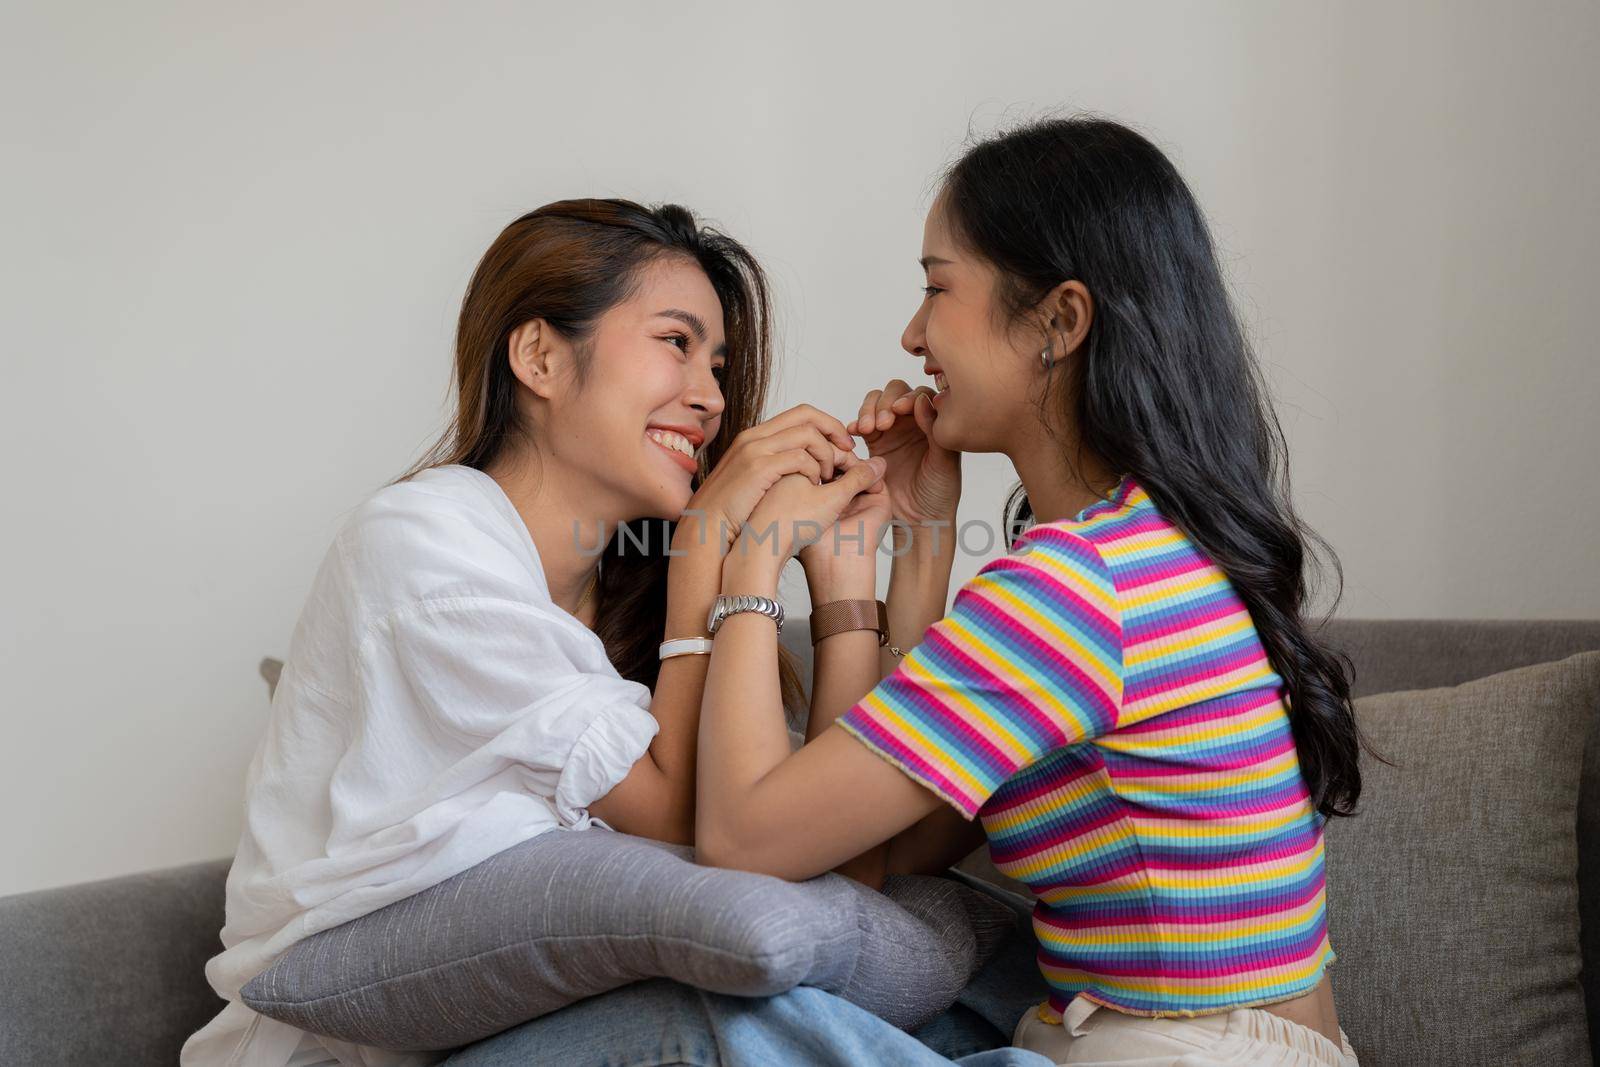 Happy lesbian, pleasure asian young two women, girl gay or close friend, couple love moment spending good time together on sofa at home. Activity of leisure, relax